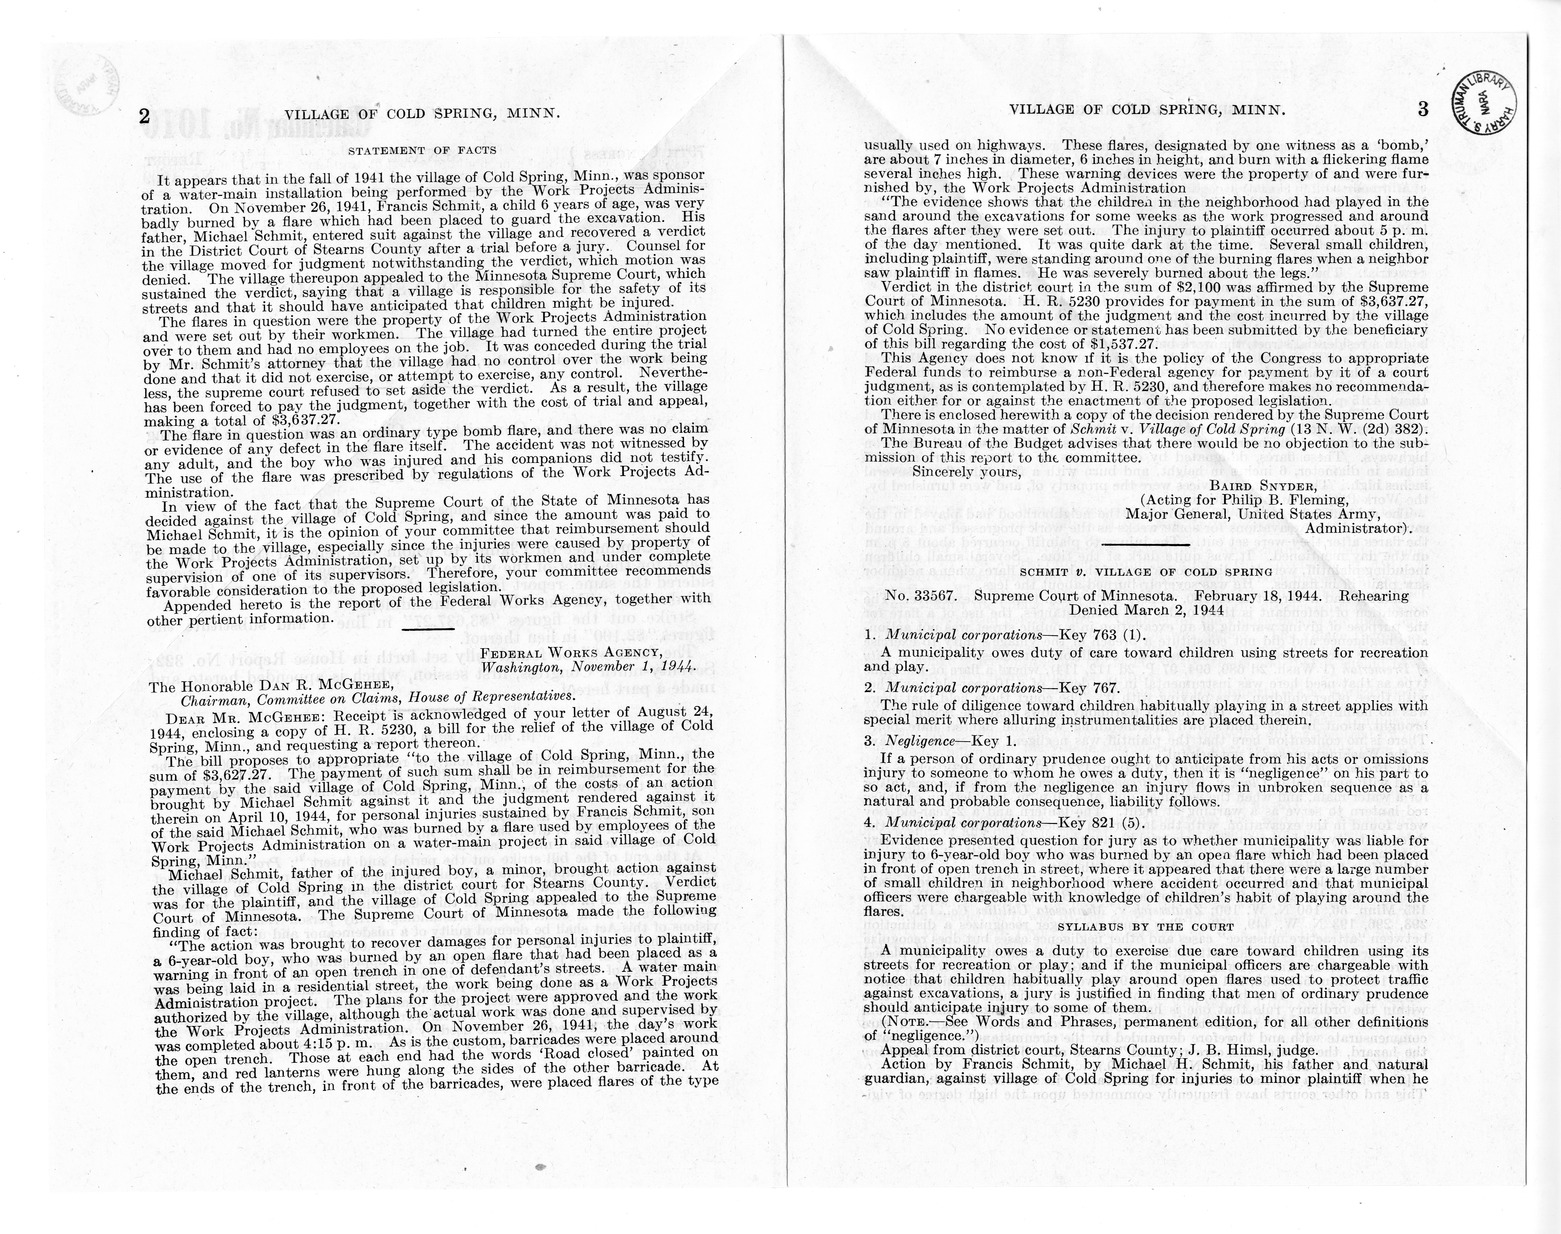 Memorandum from Frederick J. Bailey to M. C. Latta, H. R. 2008, For the Relief of the Village of Cold Spring, Minnesota, with Attachments